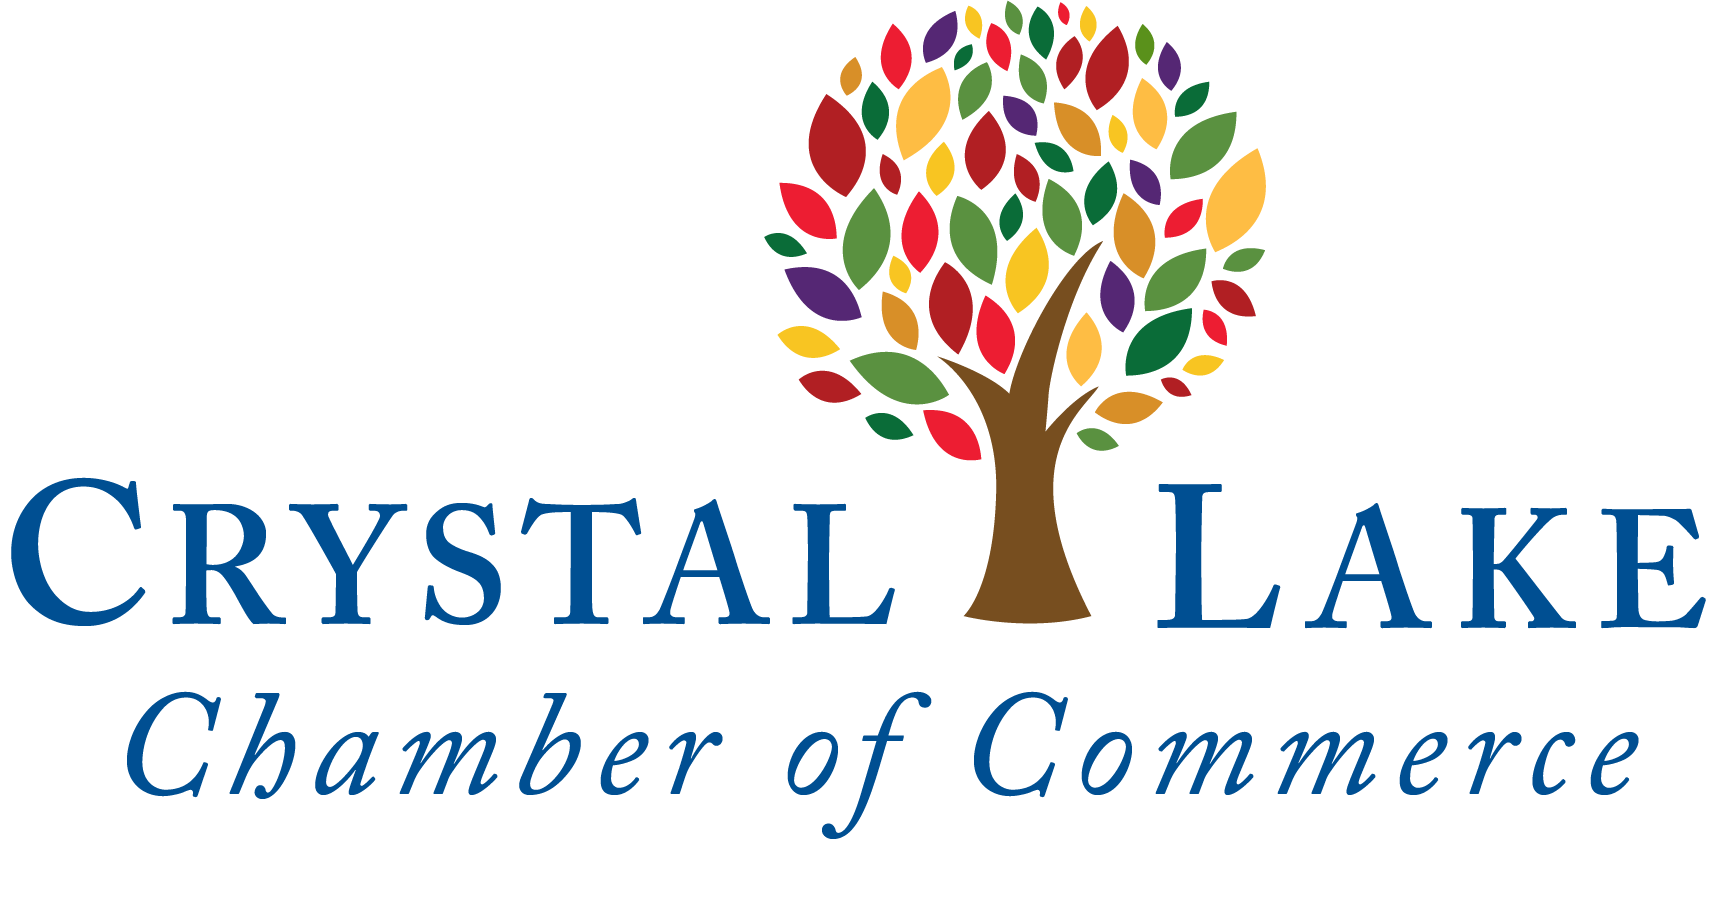 http://belissimaevents.com/wp-content/uploads/2022/07/Crystal-Lake-Chamber-of-Commerce-Logo.png